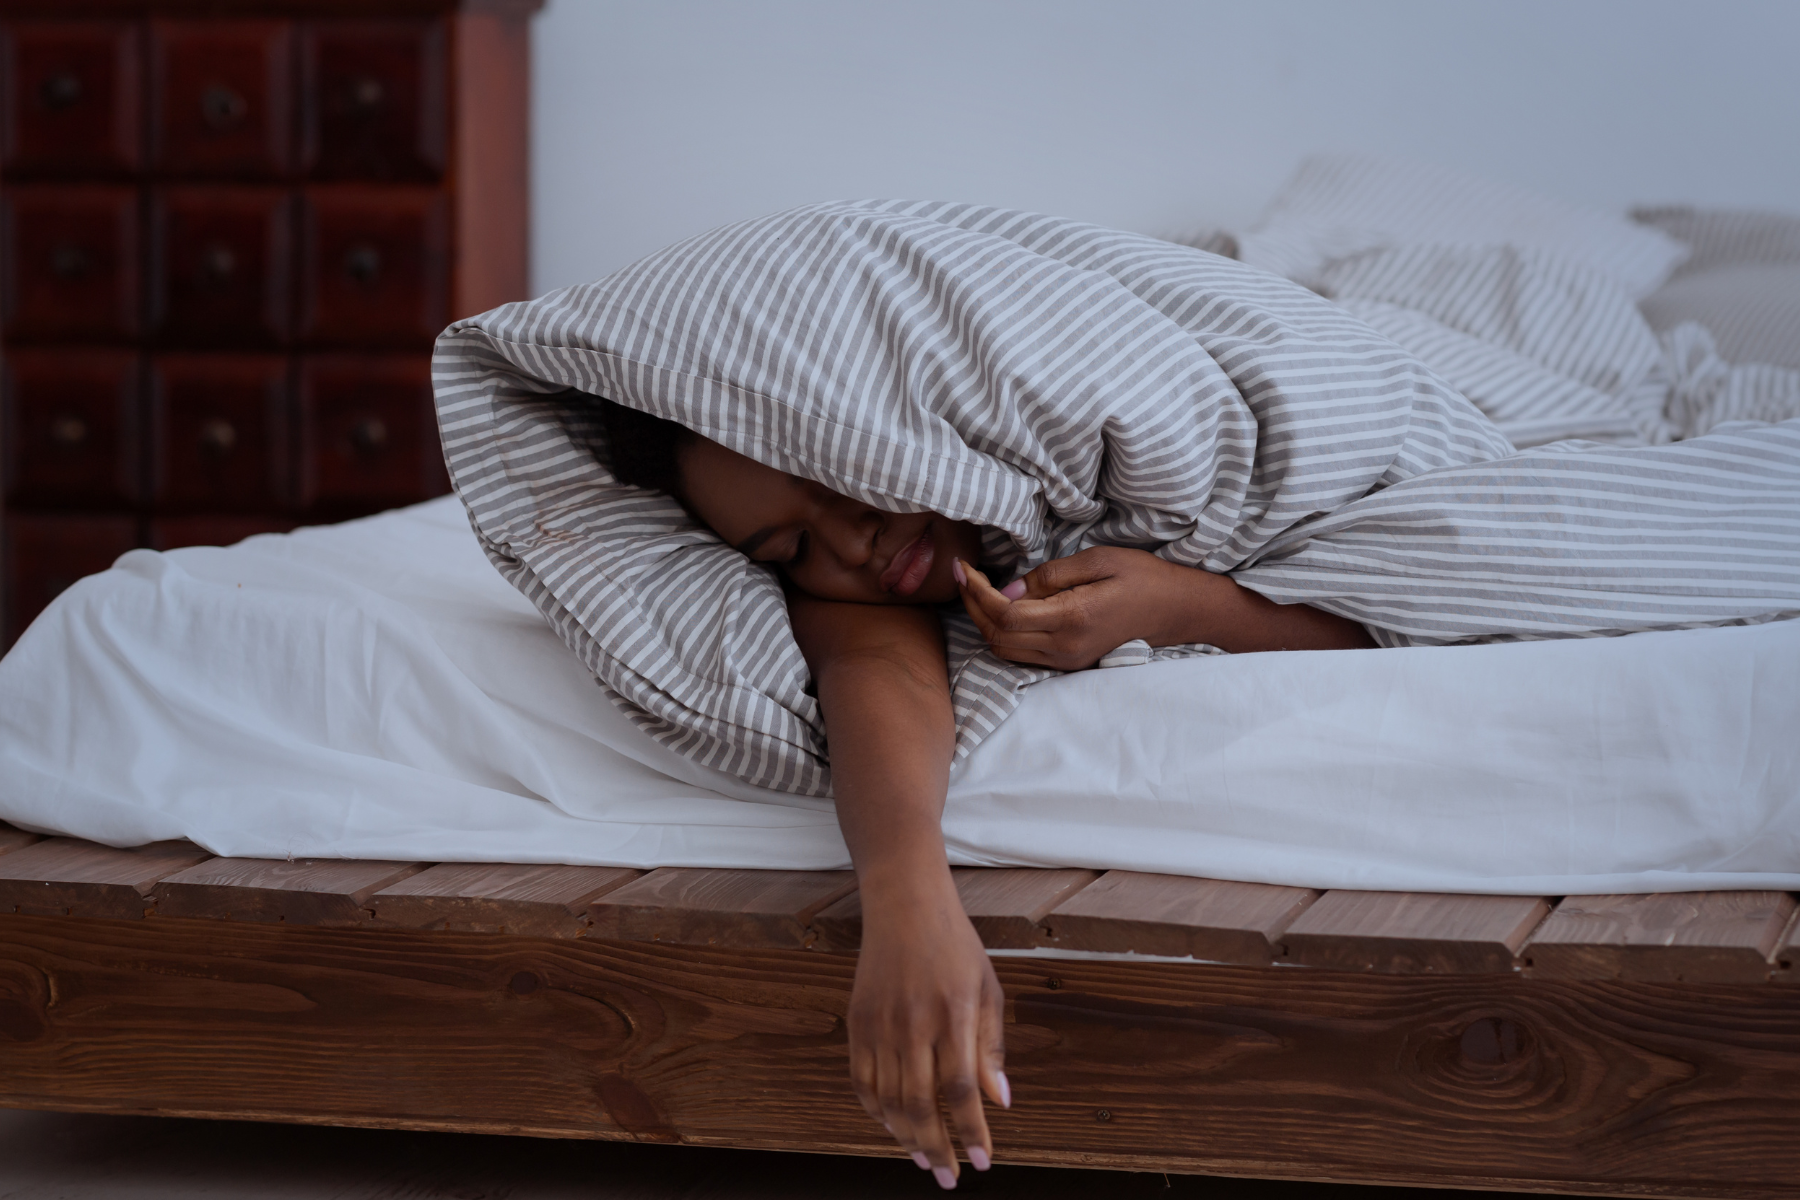 Image of a woman sleeping on a bed, arm under a blanket, depicting the challenges of menopause-related sleep disturbances.